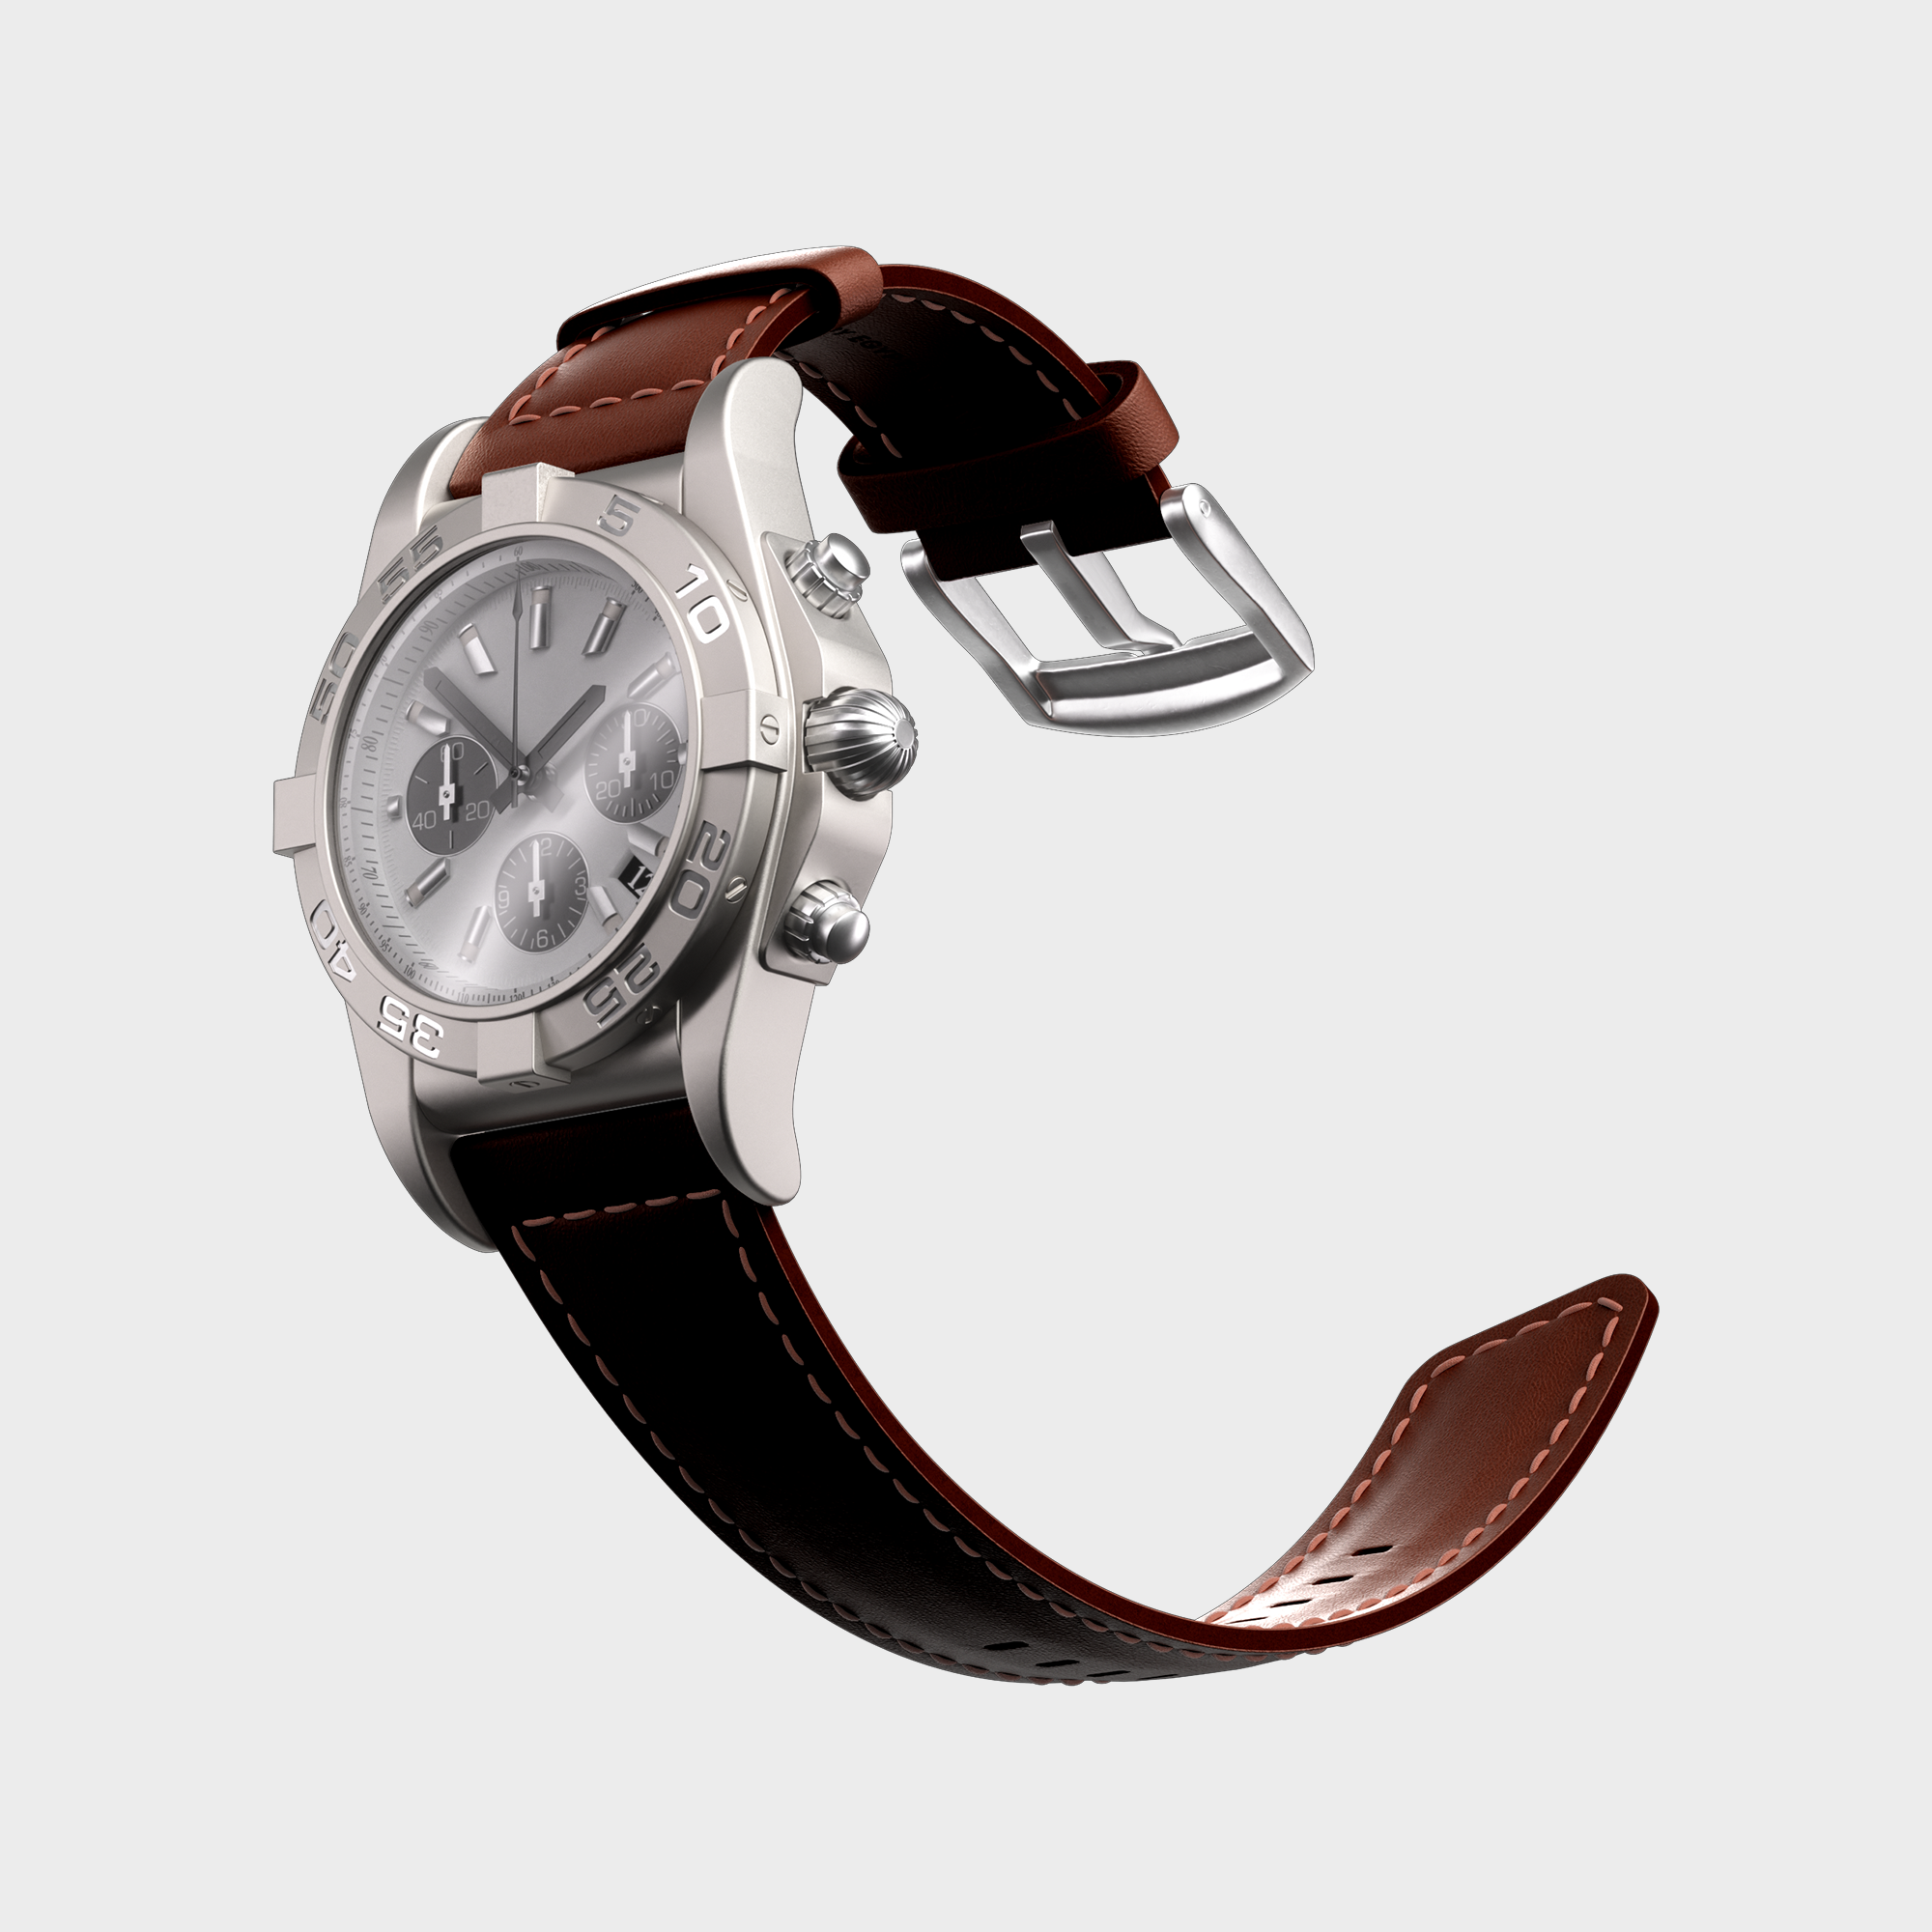 Luxury chronograph silver watch with brown leather strap on white background.